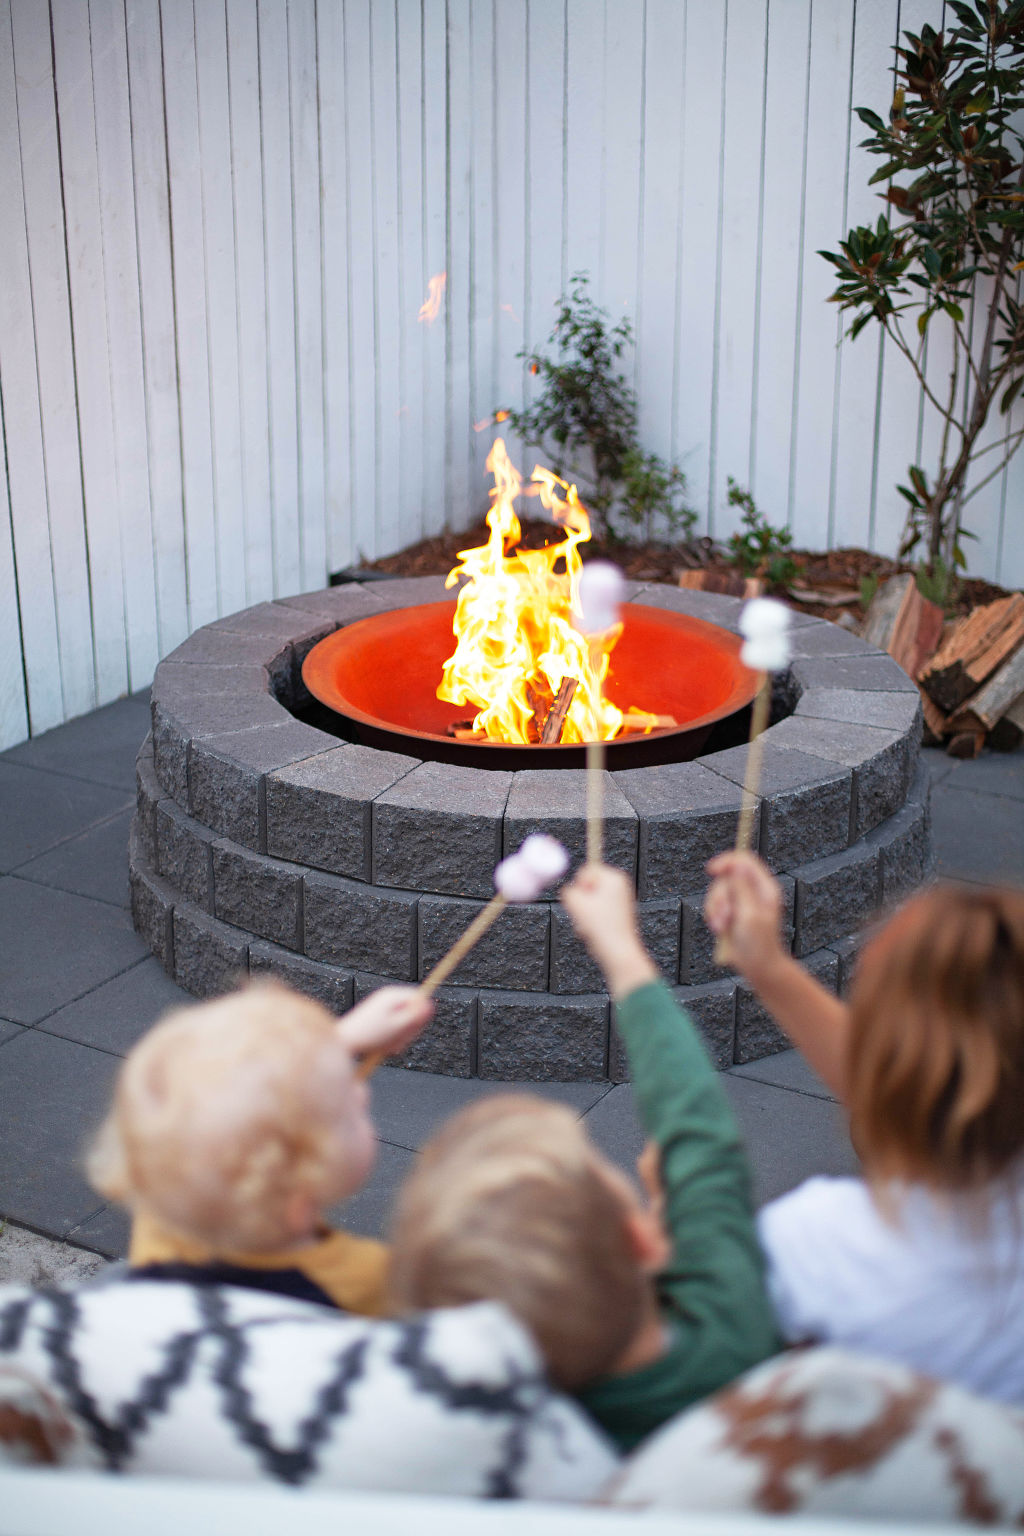 Creating your own backyard fireplace doesn’t have to be expensive. Photo: Adbri Masonry.